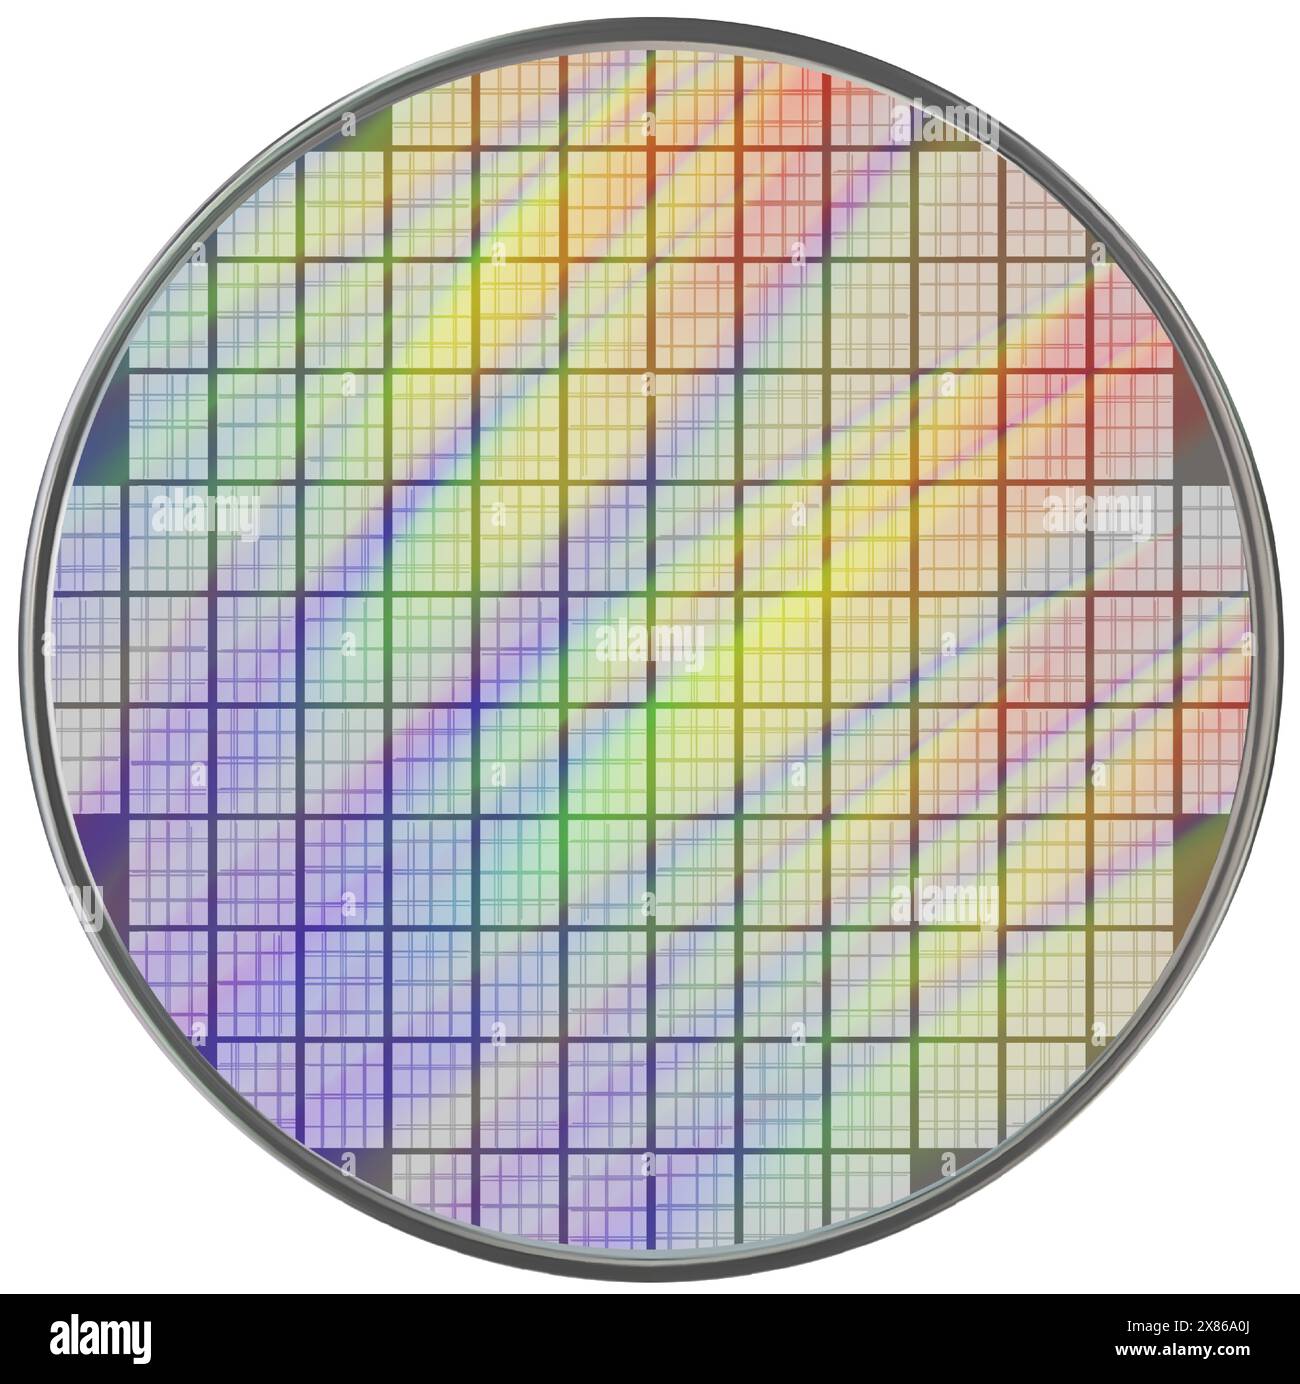 Rainbow crystalline silicon wafer with microchips on a lattice. Microelectronic device for manufacturing integrated circuits. Vector illustration Stock Vector